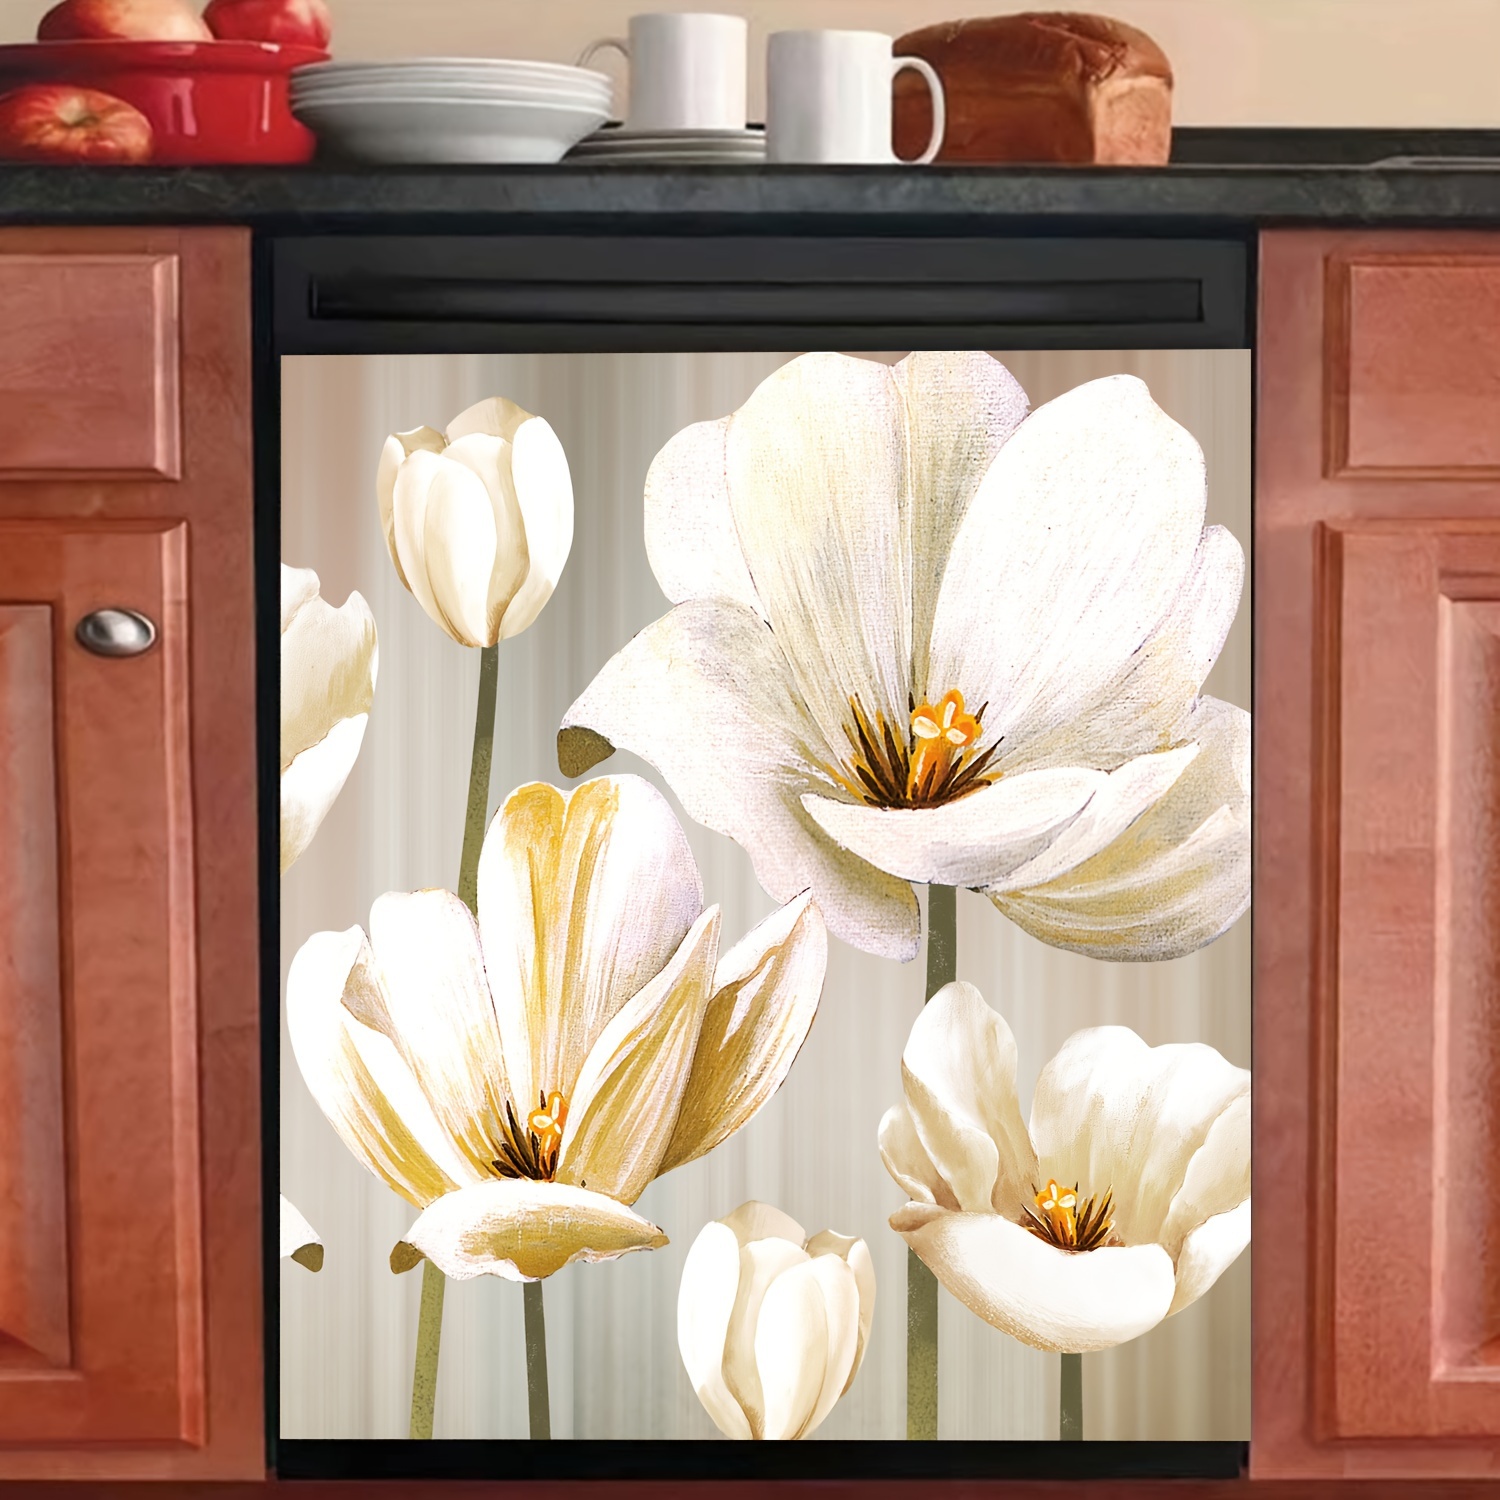 

Floral Magnetic Cover Decal For Dishwasher & Fridge - 23x25.6 Inches, Vinyl Kitchen Whiteboard Sign For Home, Office Decor